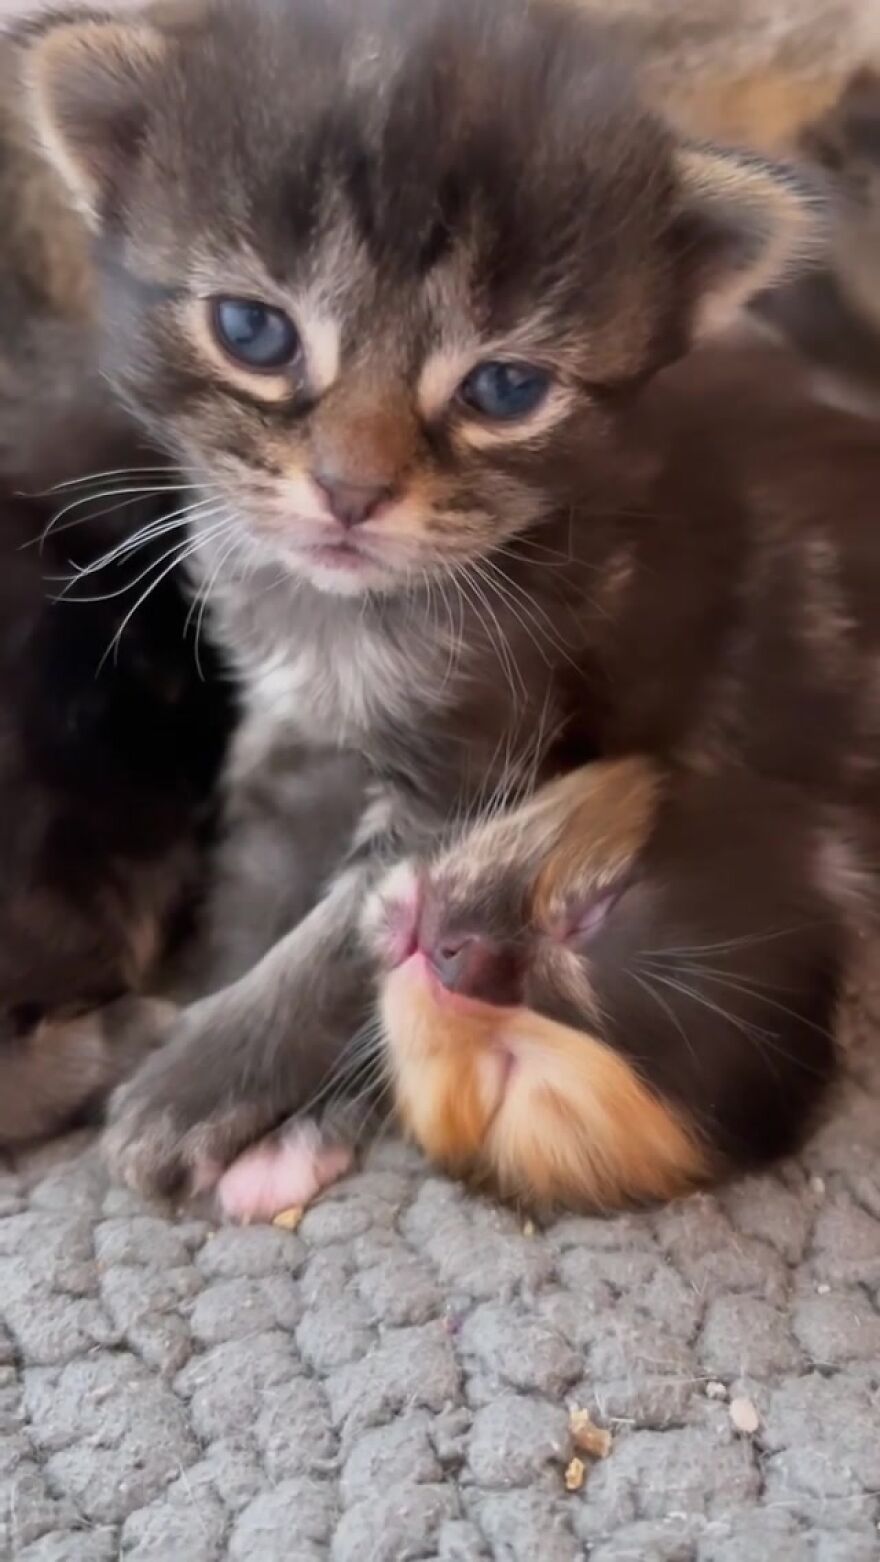 Meet Apricot, An Orphaned Chimera Kitten That Looks Like Two Different Cats Merged Into One